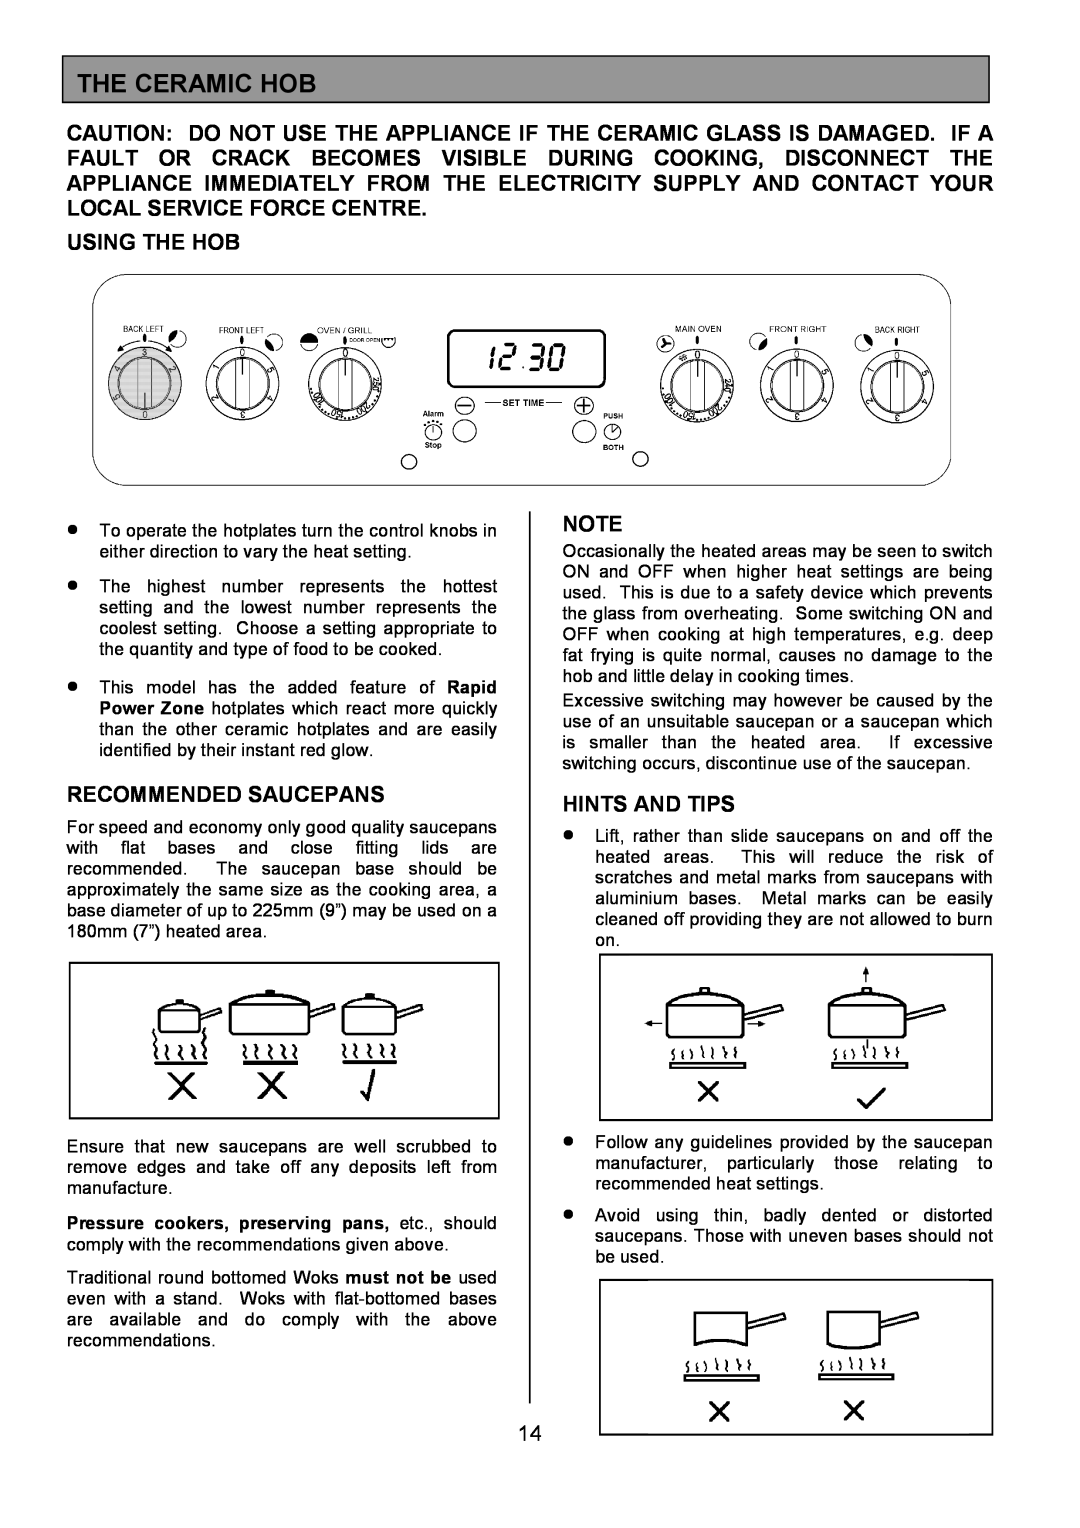 Tricity Bendix SIE554 installation instructions The Ceramic Hob, Using The Hob, Recommended Saucepans, Hints And Tips 